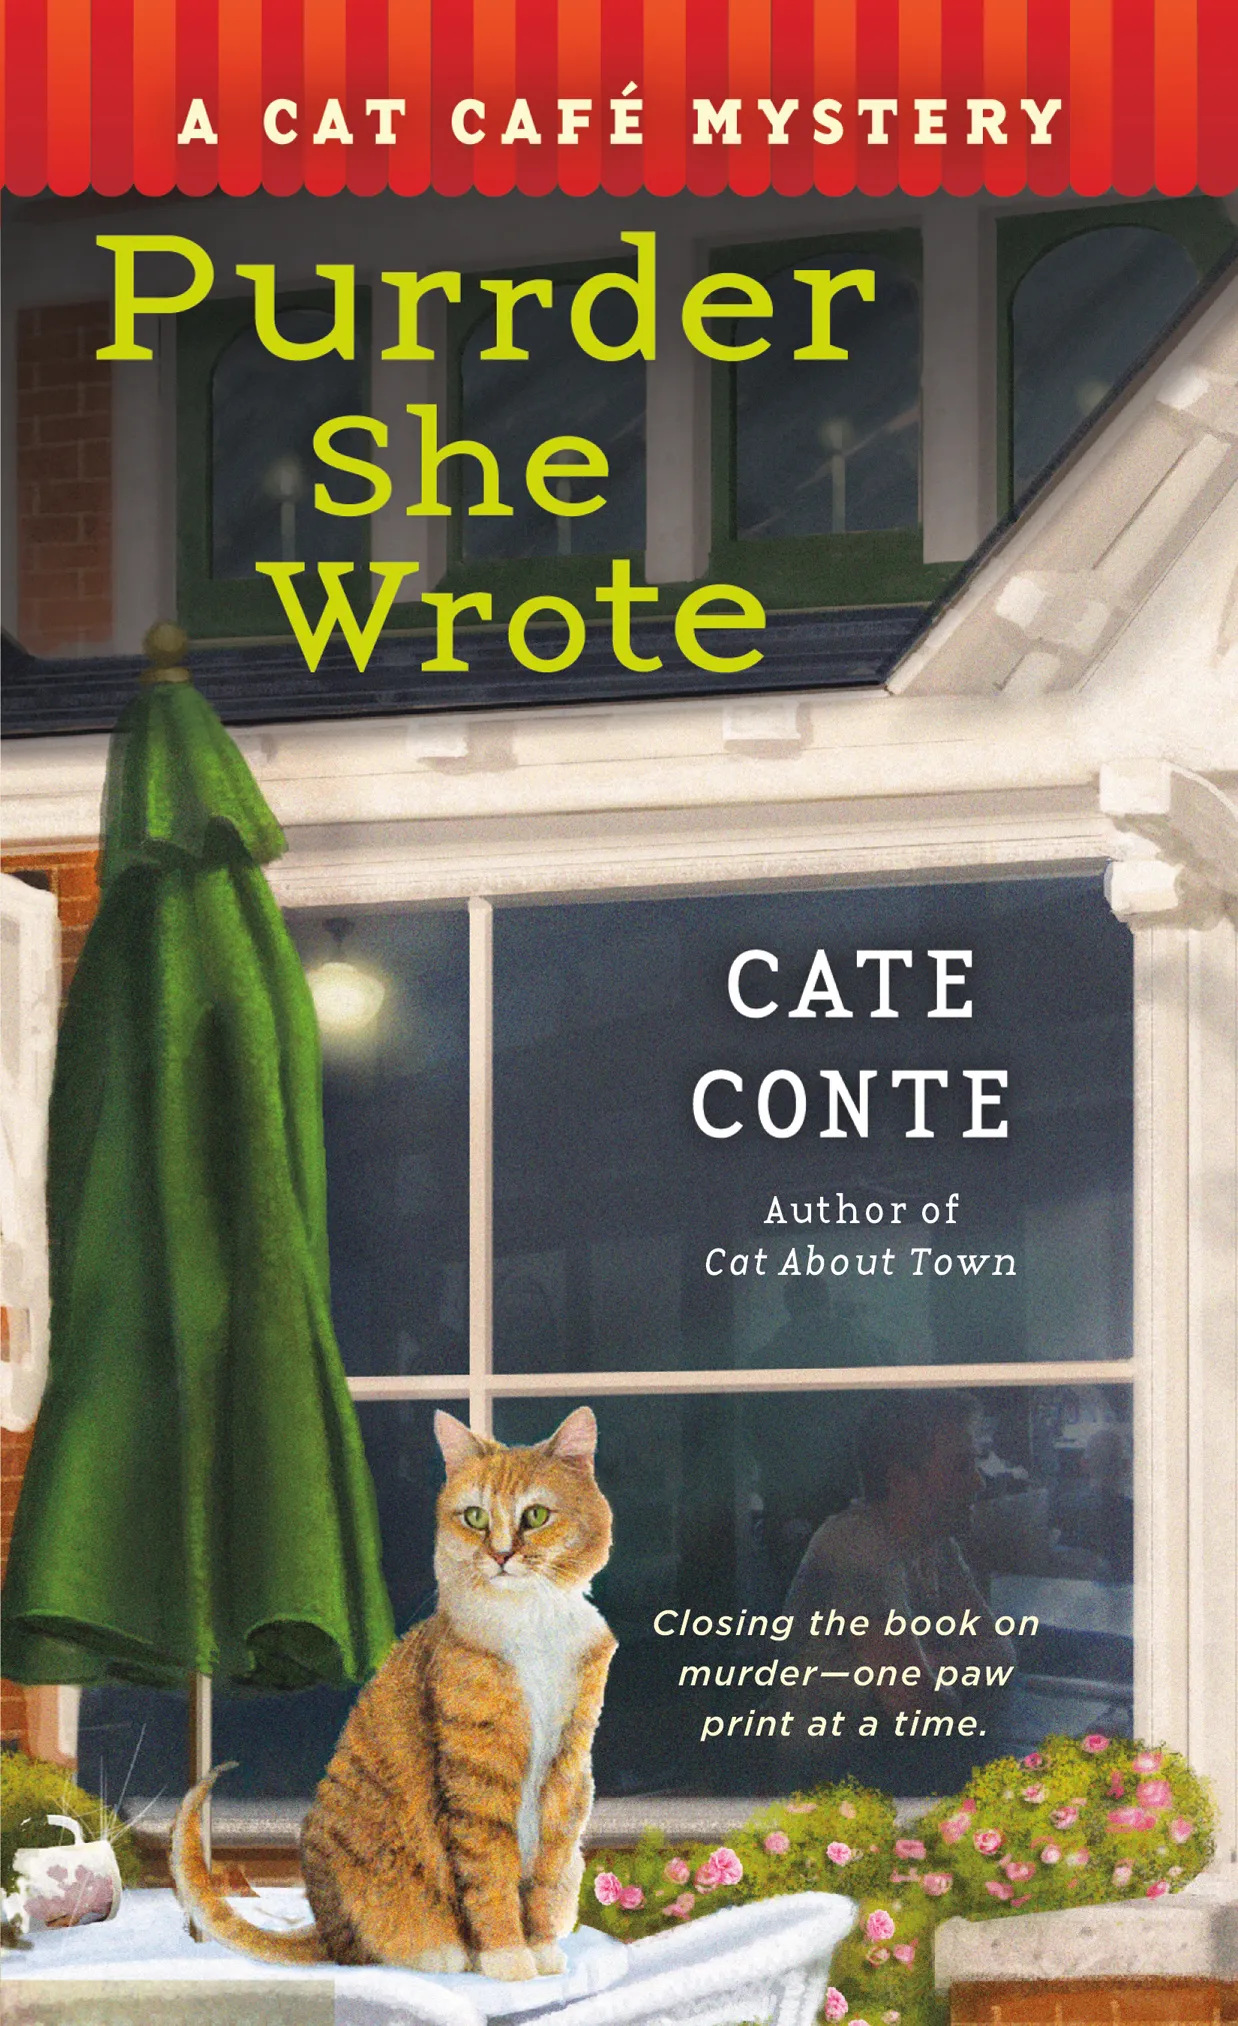 Purrder She Wrote (Cat Cafe Mystery #2)